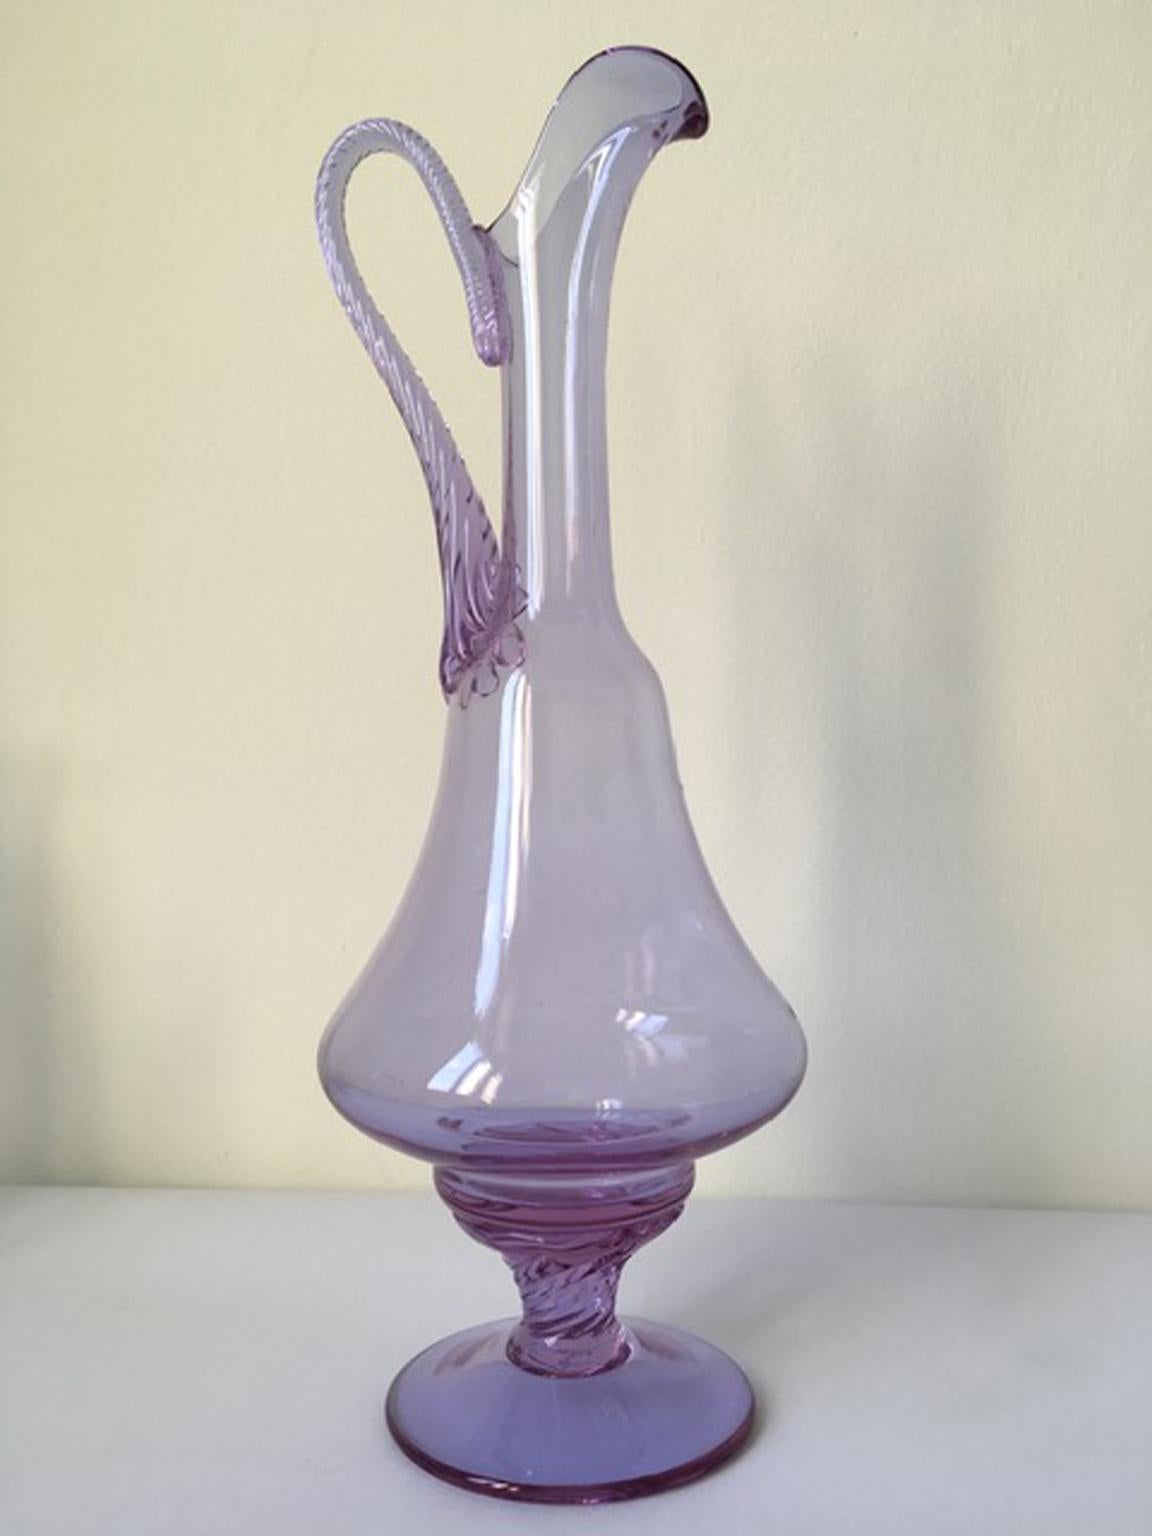 This is an elegant shaped bottle hand made in Murano, Venice in 1960 in Murano blown glass. The piece is very charming and on it are visible the signs of the handwork.
The bottle has a vibrant color, the purple color.

This piece can be part of your